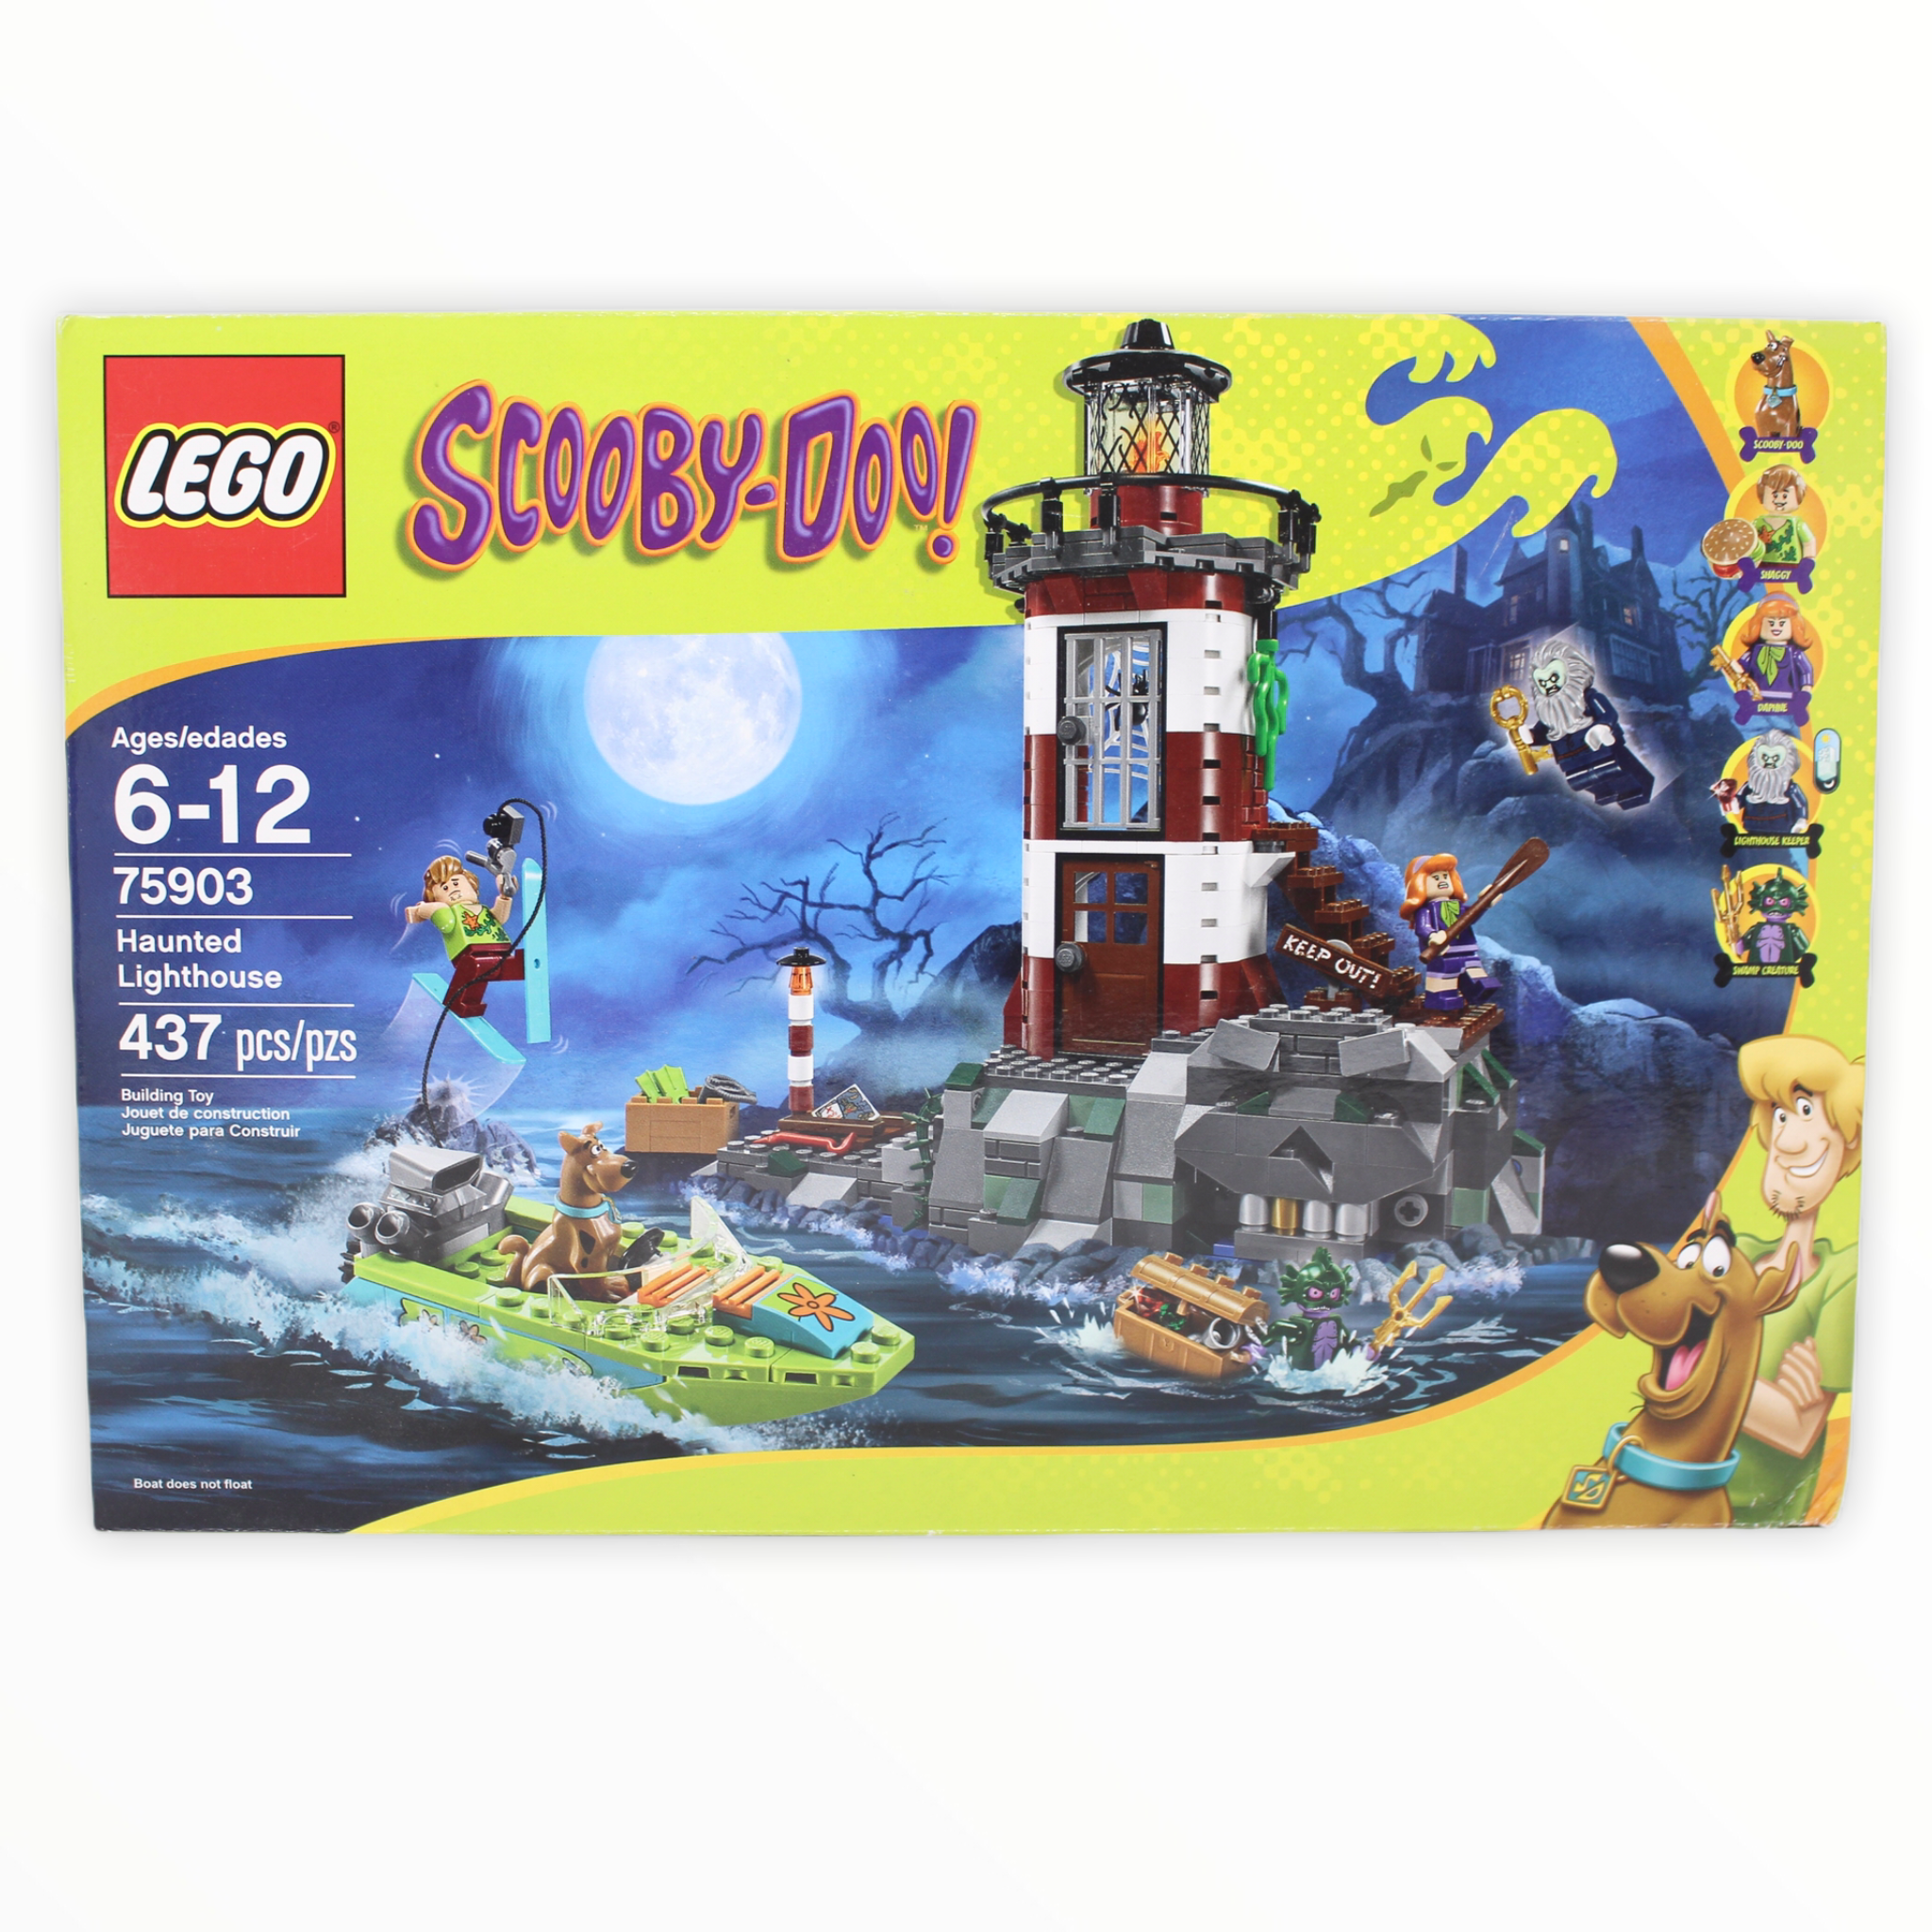 Retired Set 75903 Scooby-Doo! Haunted Lighthouse